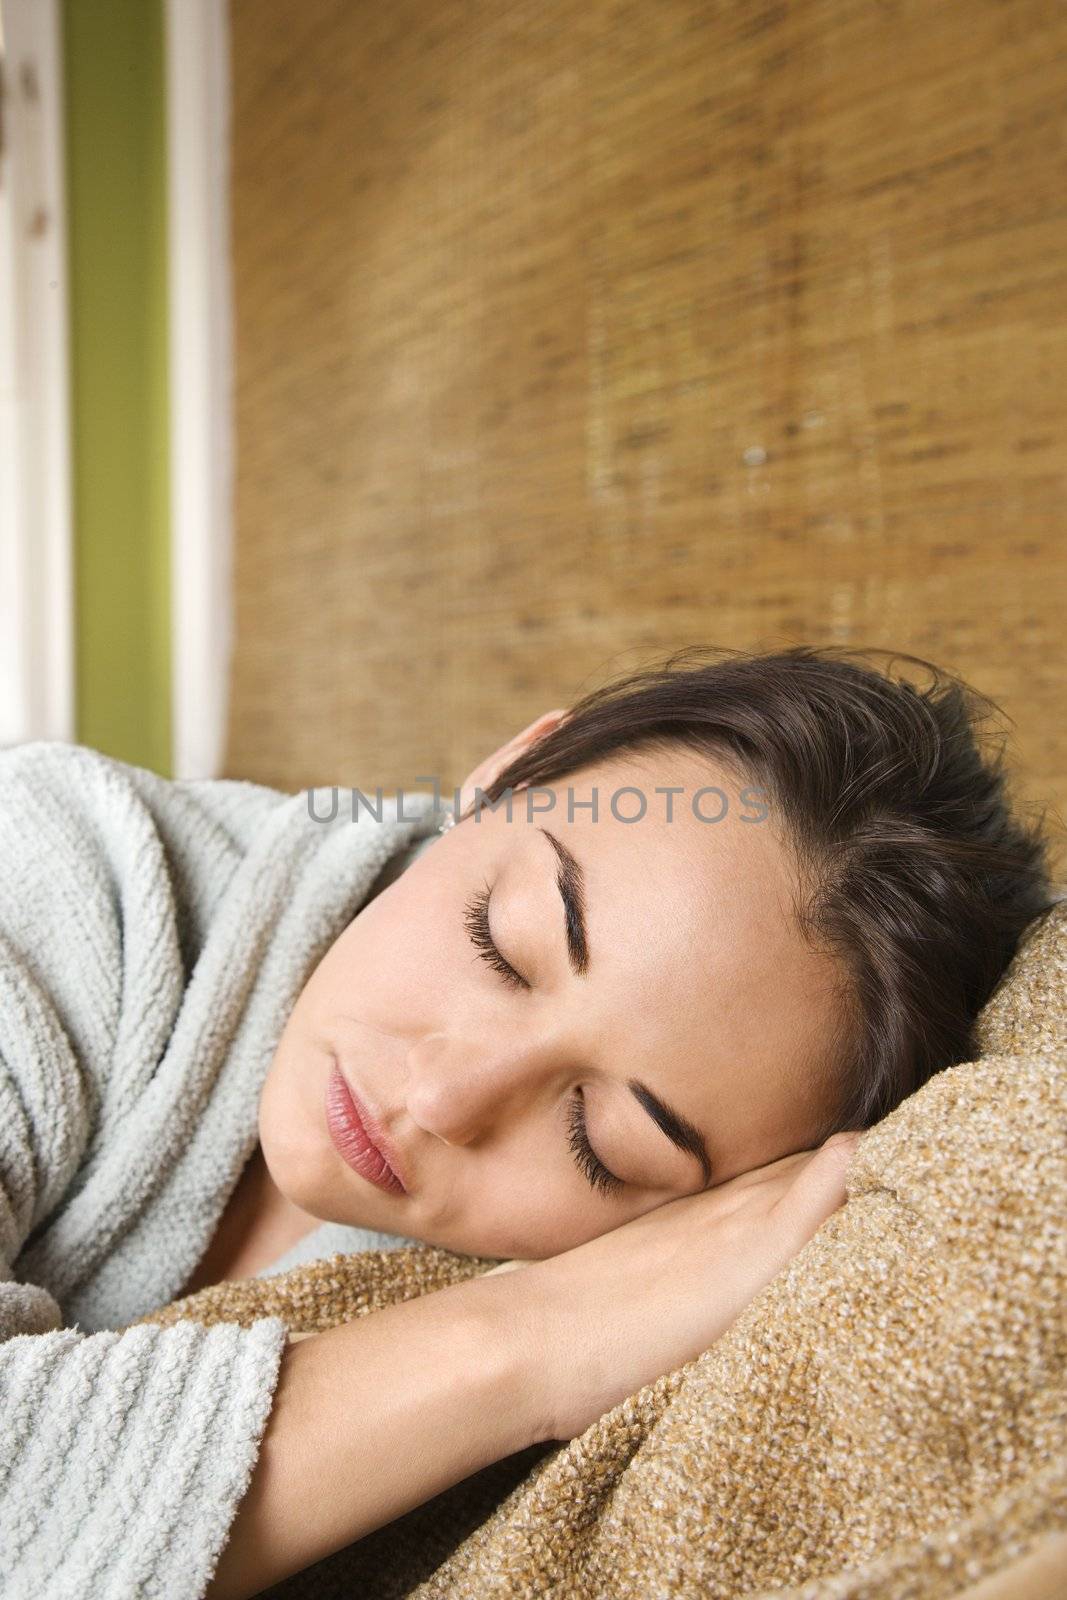 Caucasian/Hispanic young woman with eyes closed laying down.